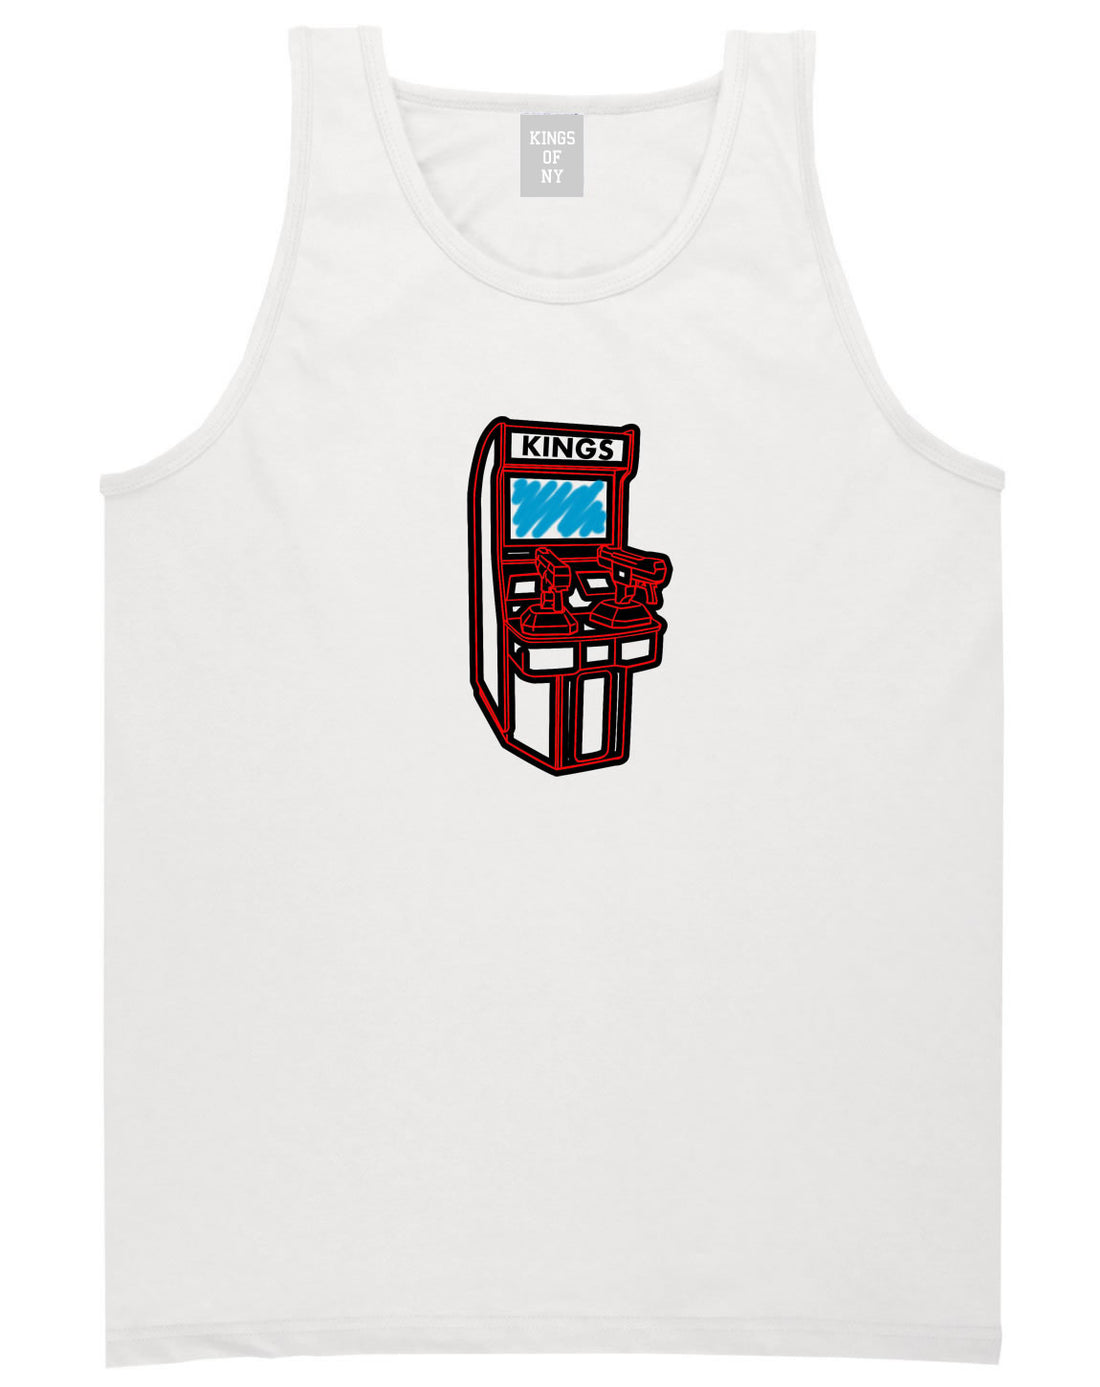 Arcade Game Gamer Tank Top in White By Kings Of NY